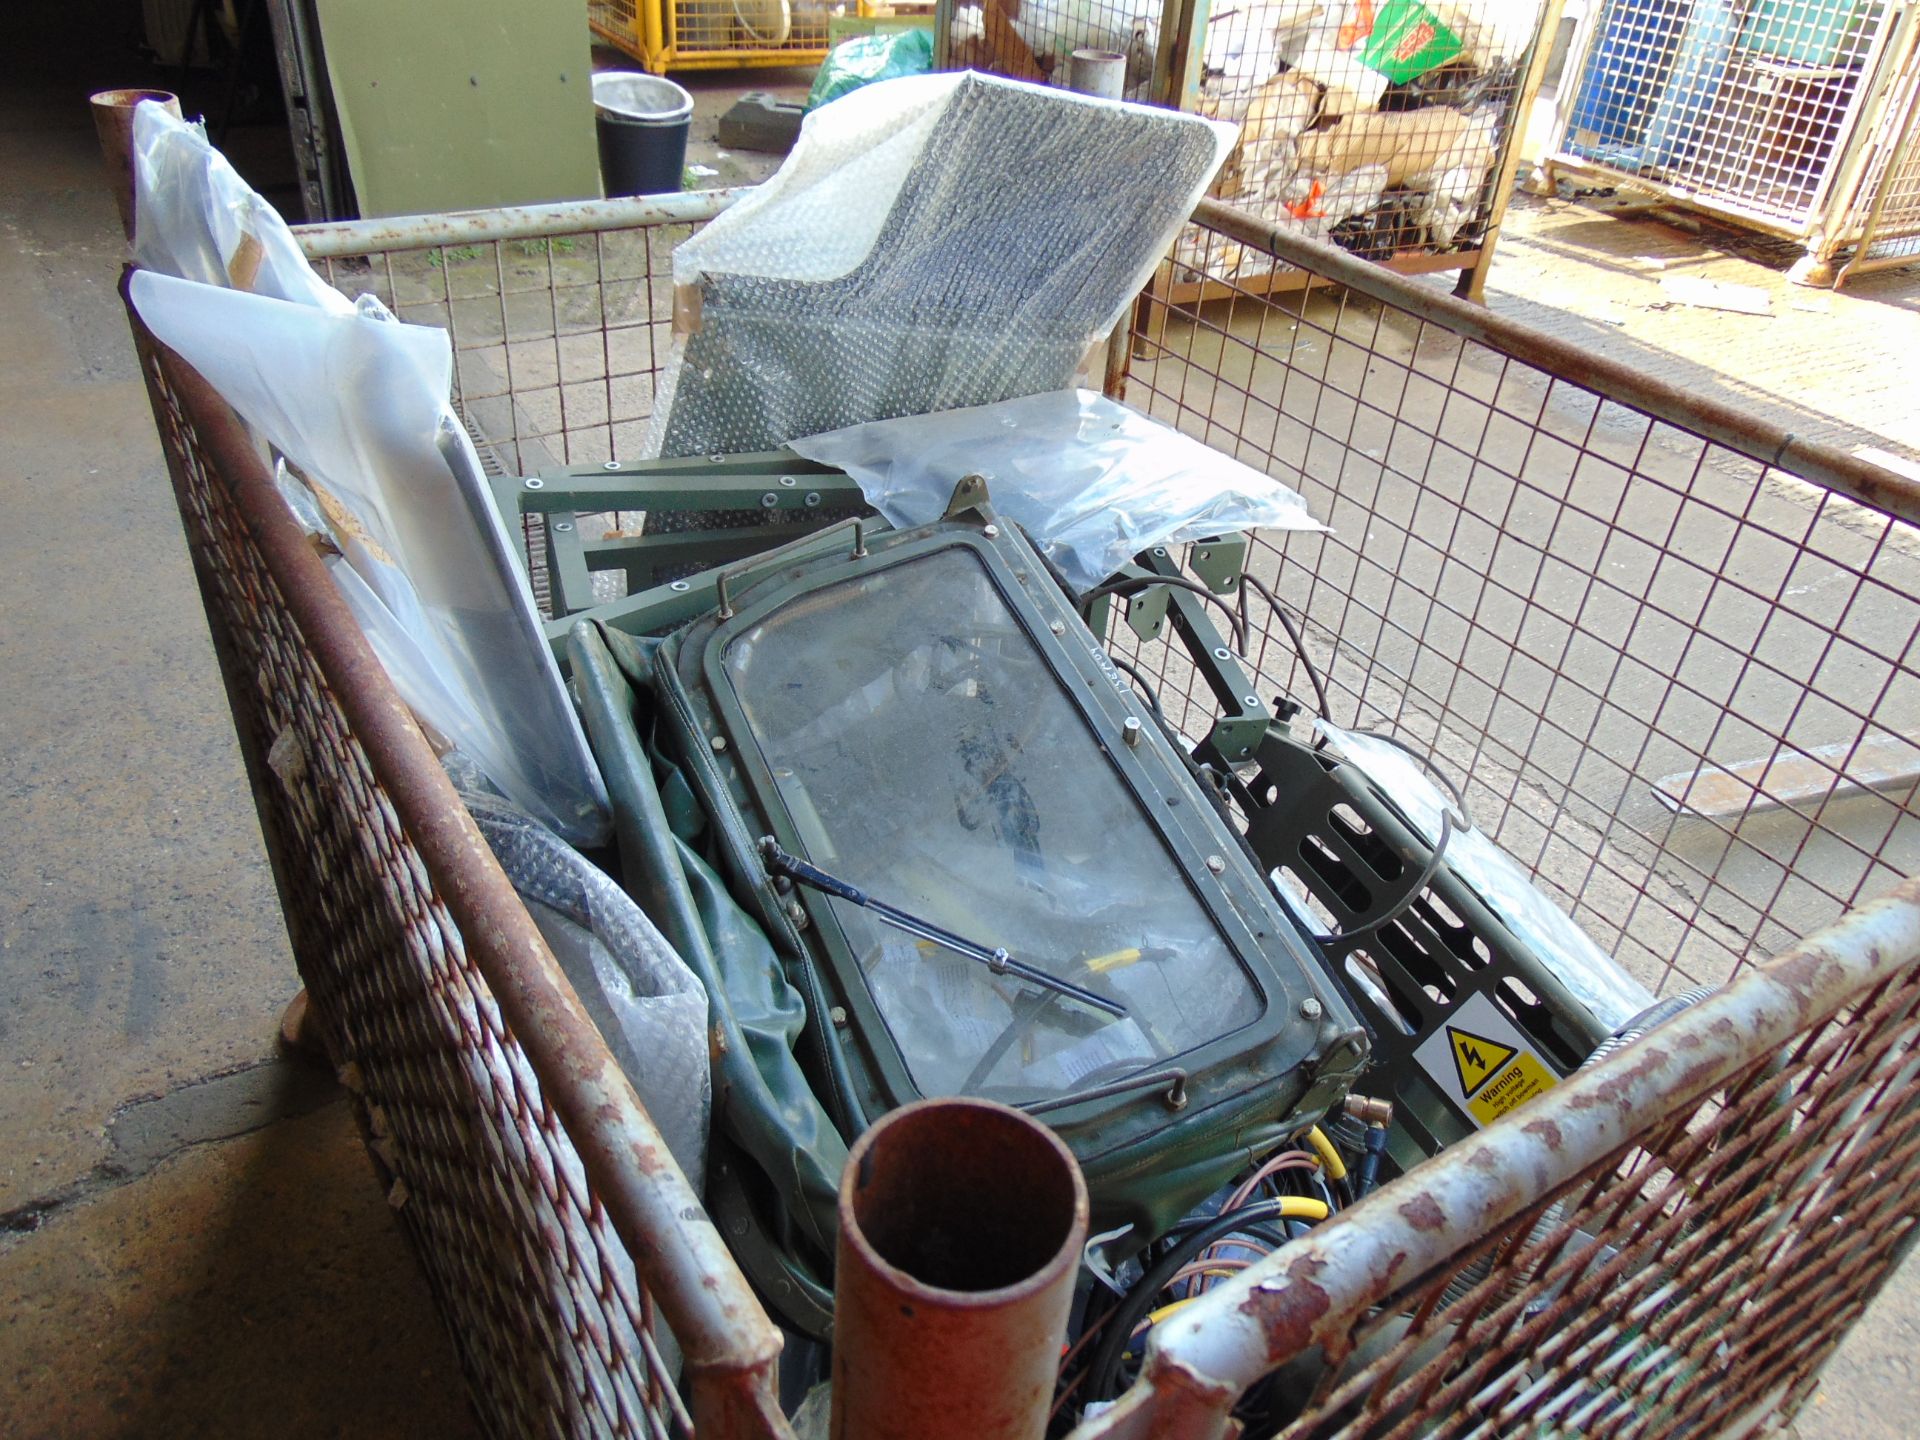 1 x Stillage of Unissued AFV Spares / CES Windscreen, Covers, Cable, Radio Mountings Etc